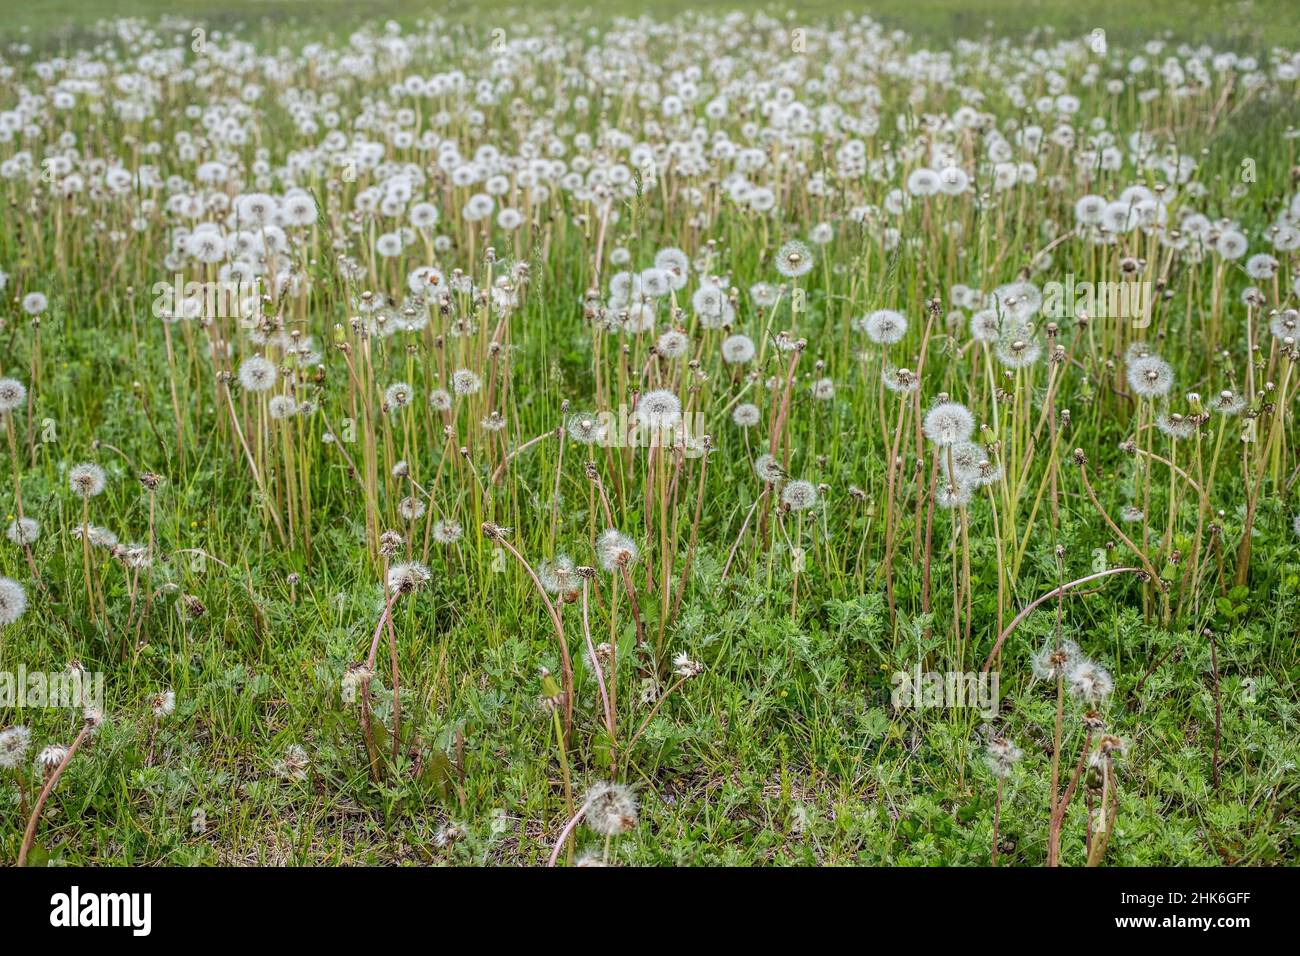 Dandelions gone to seed in a field. Stock Photo